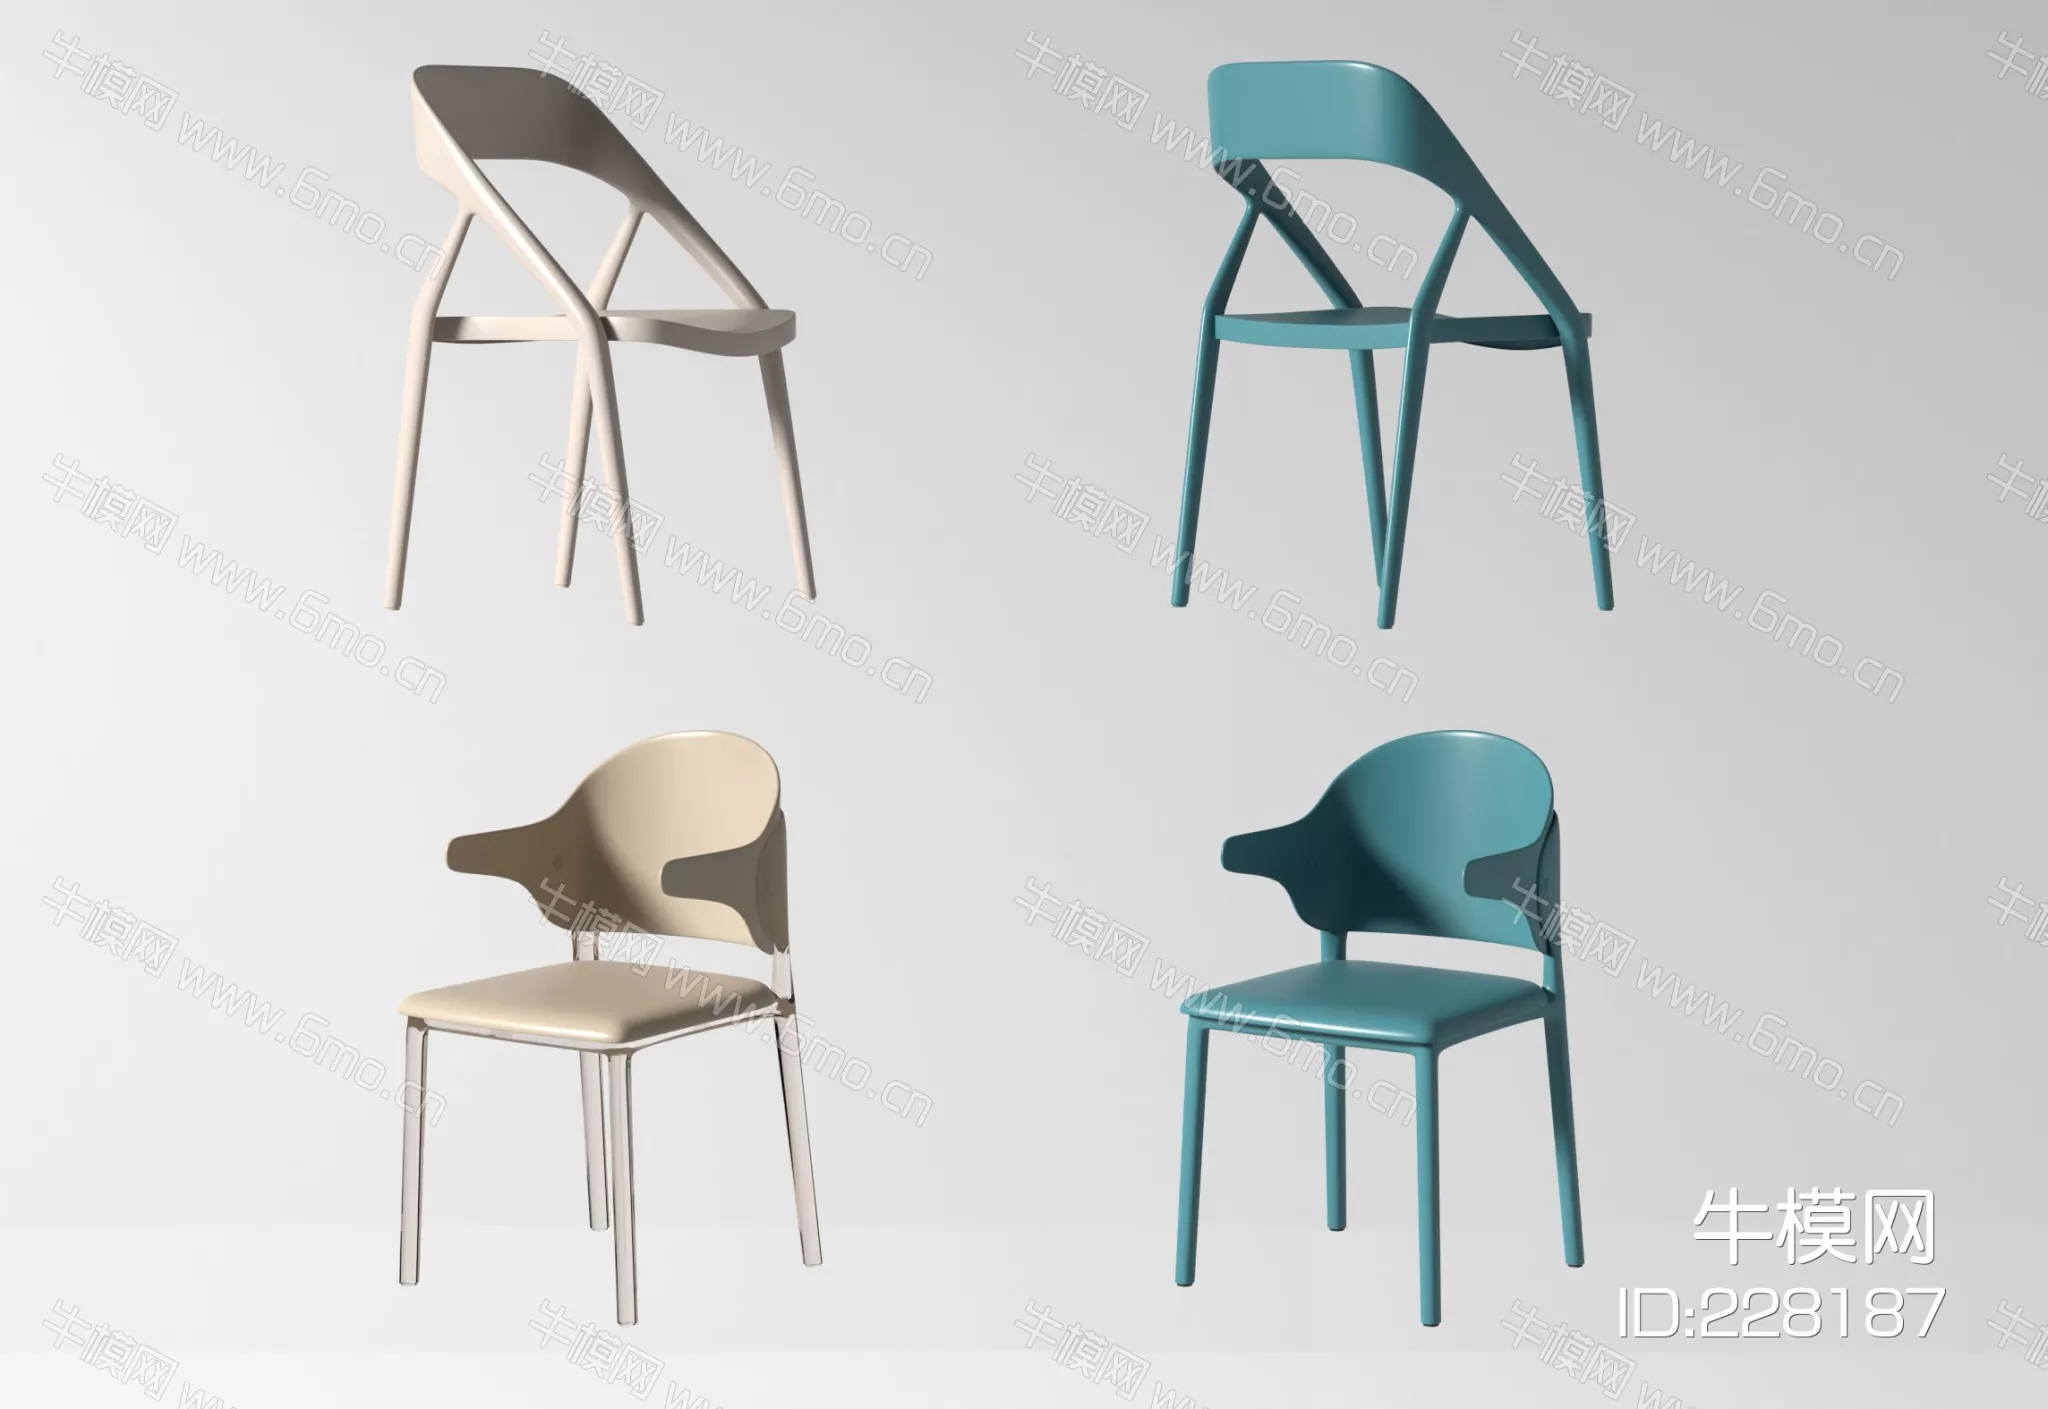 NORDIC LOUNGLE CHAIR - SKETCHUP 3D MODEL - VRAY - 228187